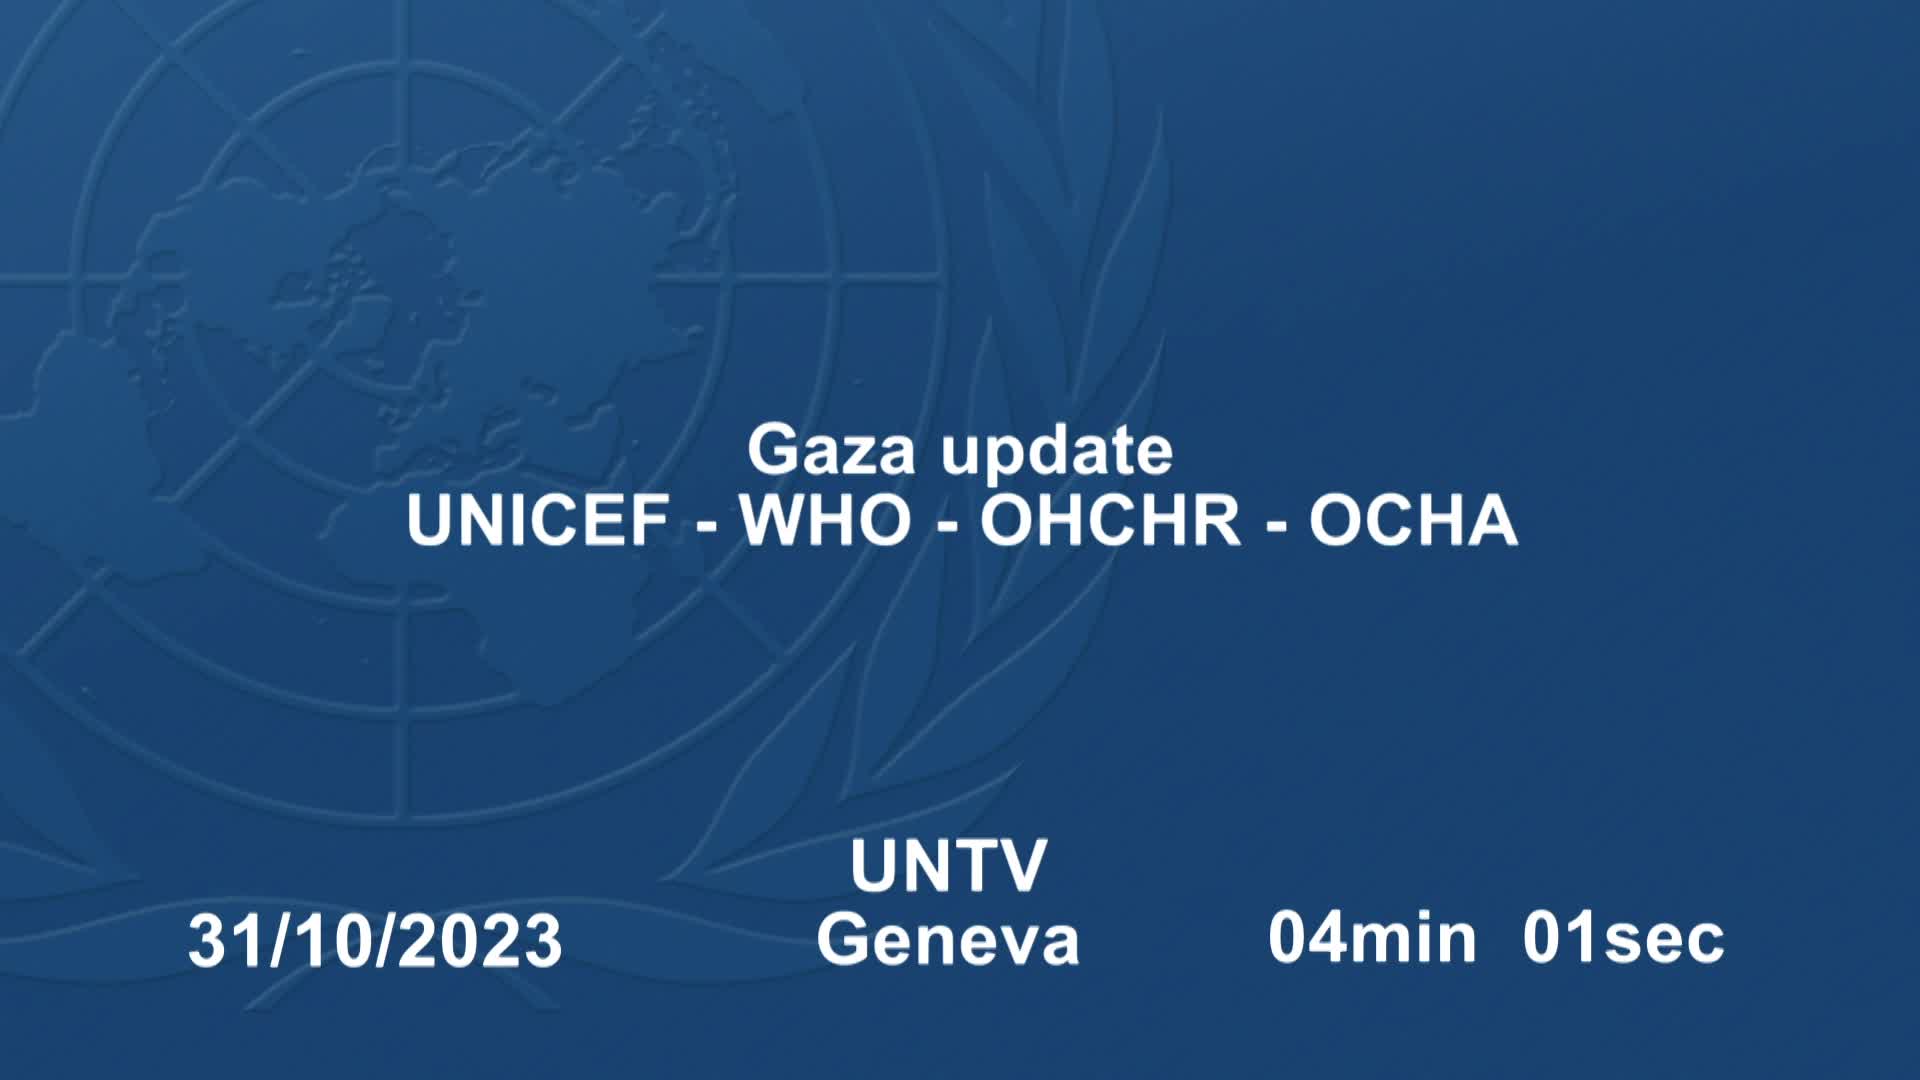 UN Human Rights briefing by Liz Throssell on the situation in Gaza and the Occupied West Bank